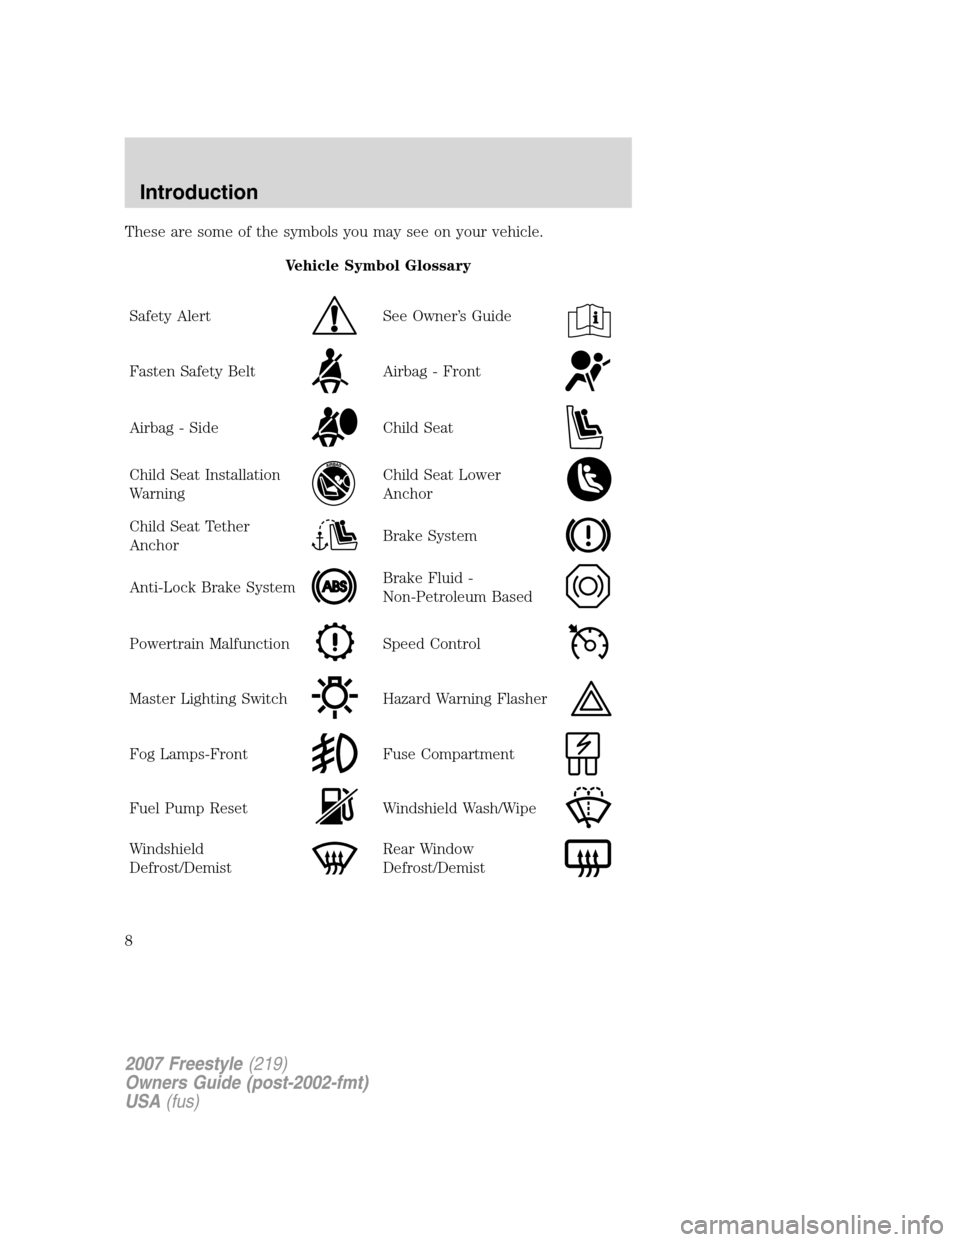 FORD FREESTYLE 2007 1.G Owners Manual These are some of the symbols you may see on your vehicle.
Vehicle Symbol Glossary
Safety Alert
See Owner’s Guide
Fasten Safety BeltAirbag - Front
Airbag - SideChild Seat
Child Seat Installation
War